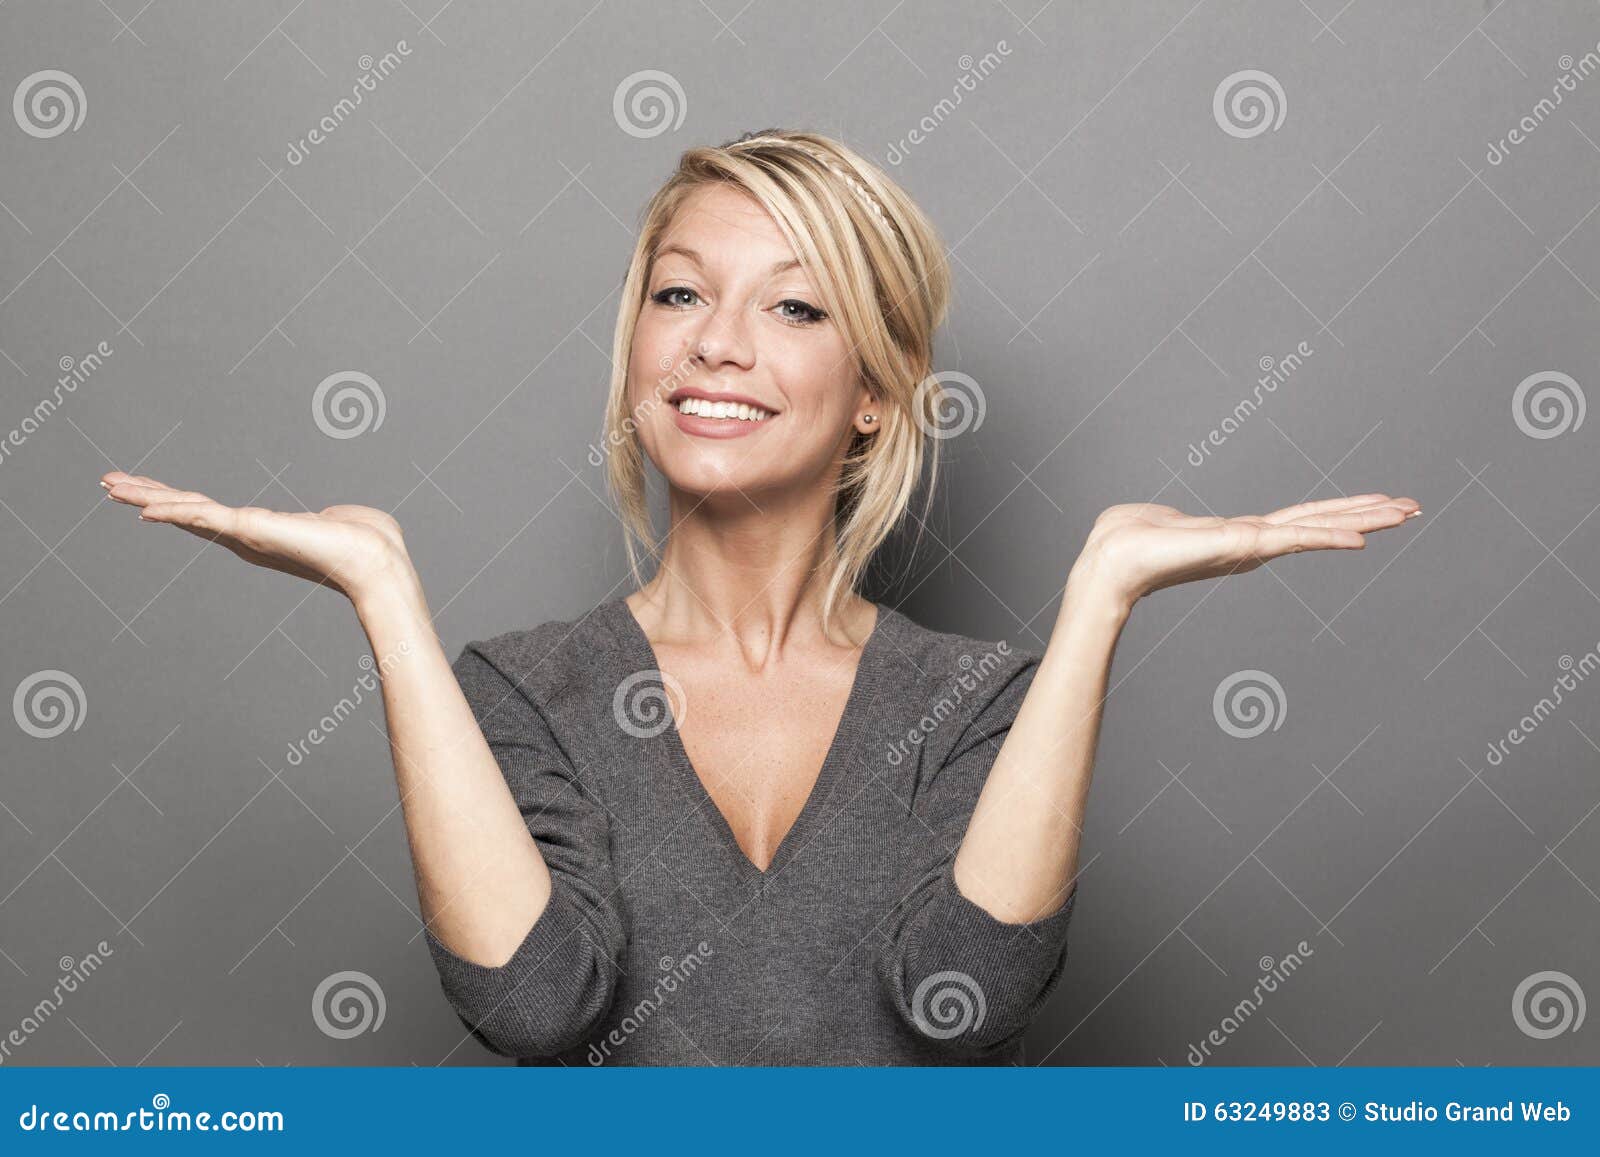 body language concept for satisfied 20s blond woman